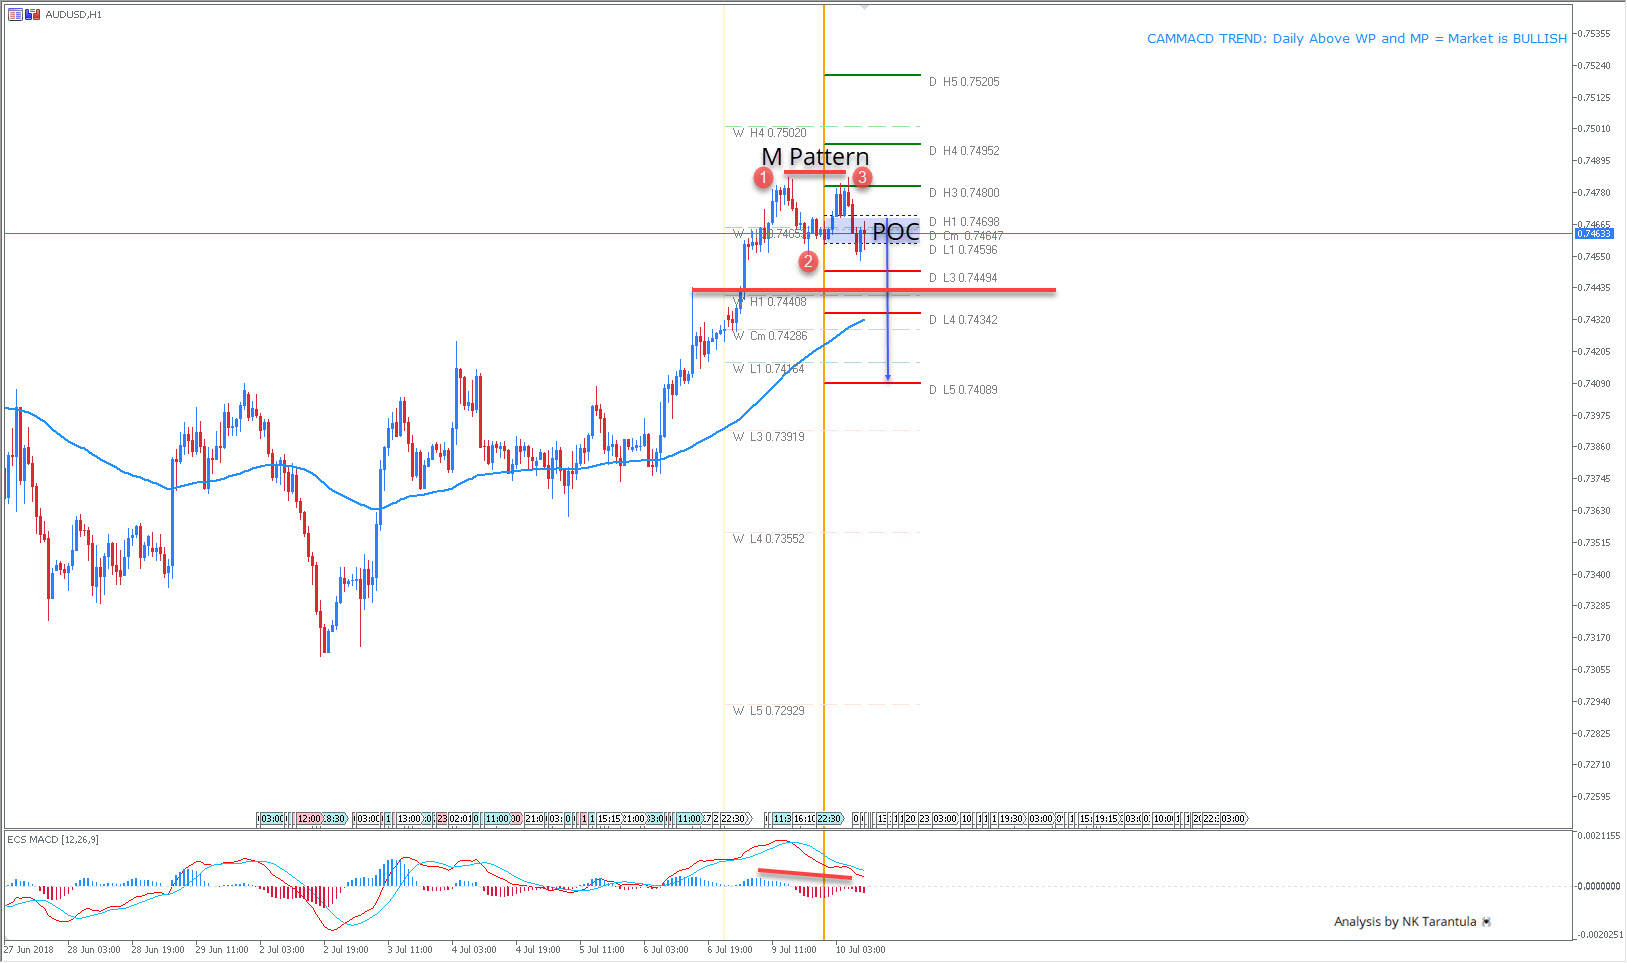 AUD/USD Reverse Bearish Divergence and M Pattern for a Counter Trend Setup